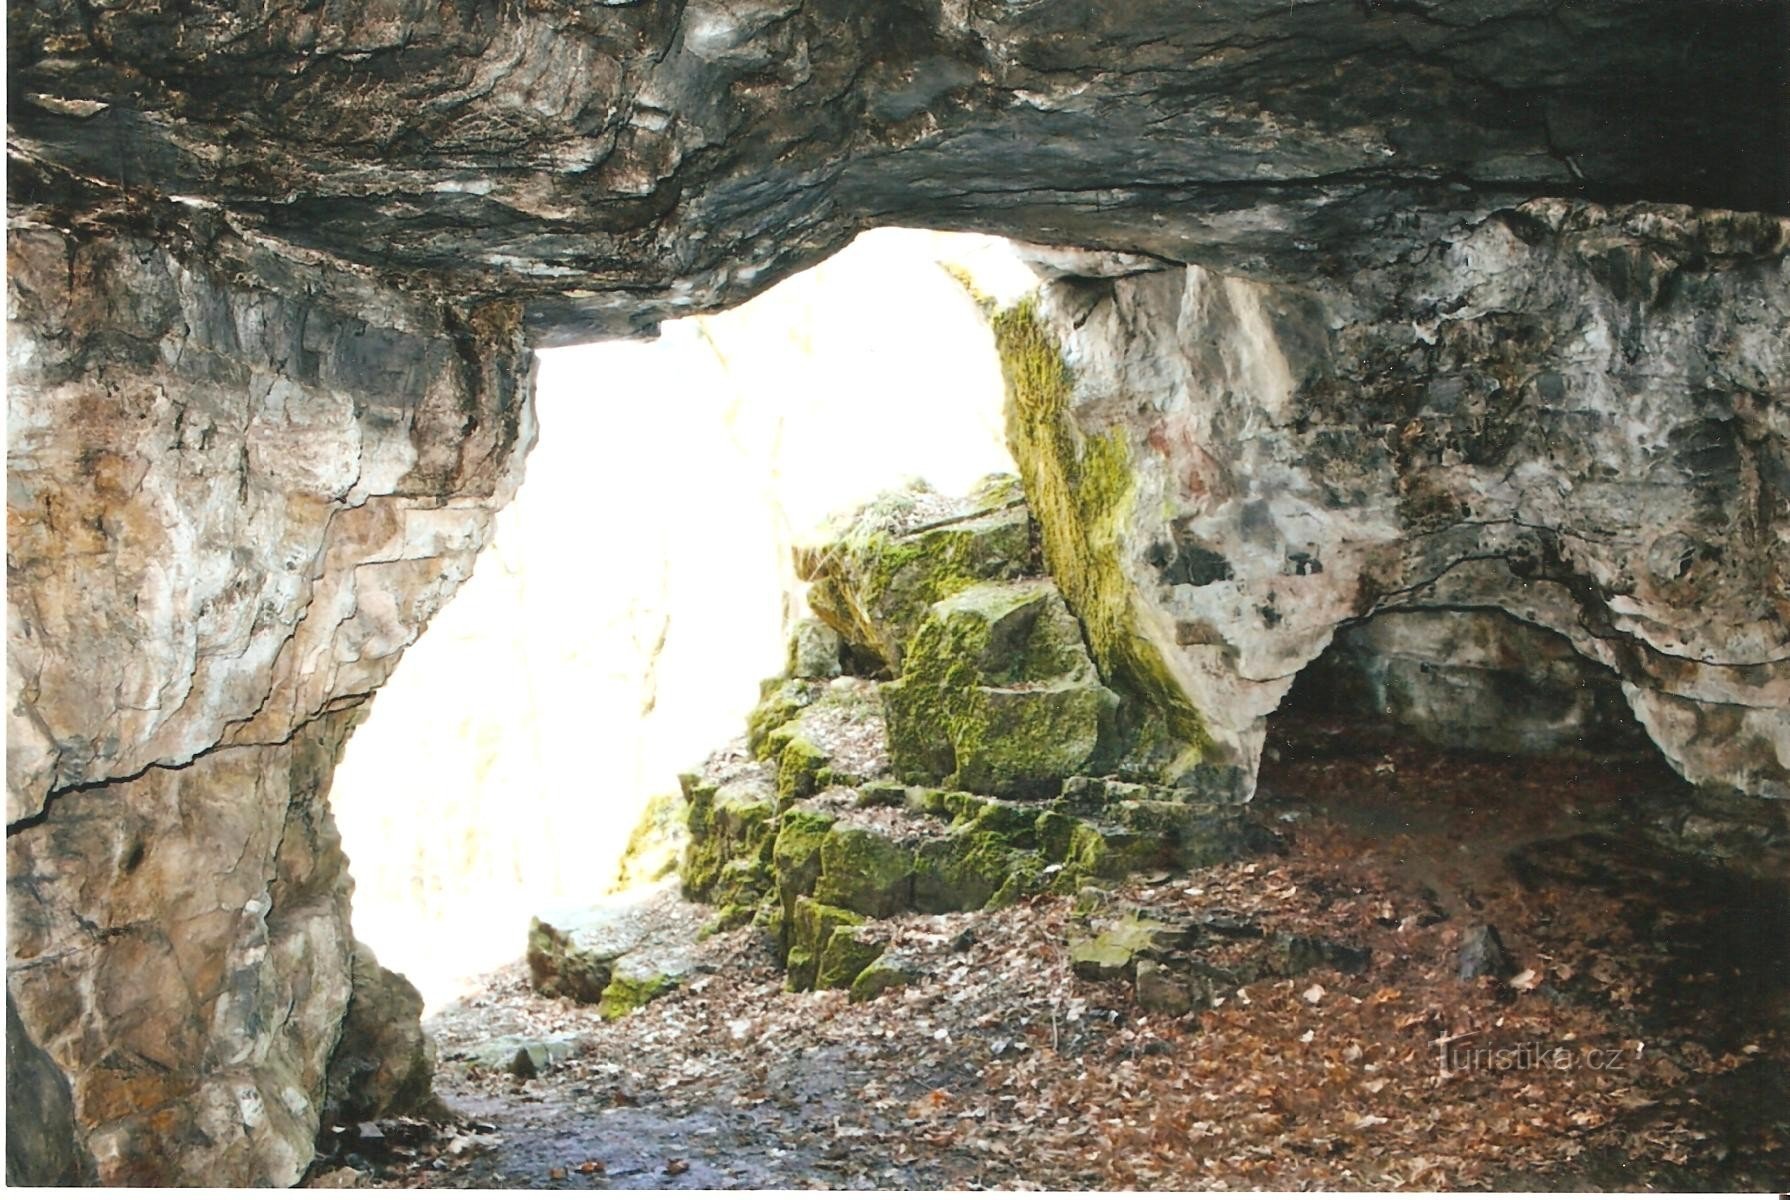 The Swedish Table Cave